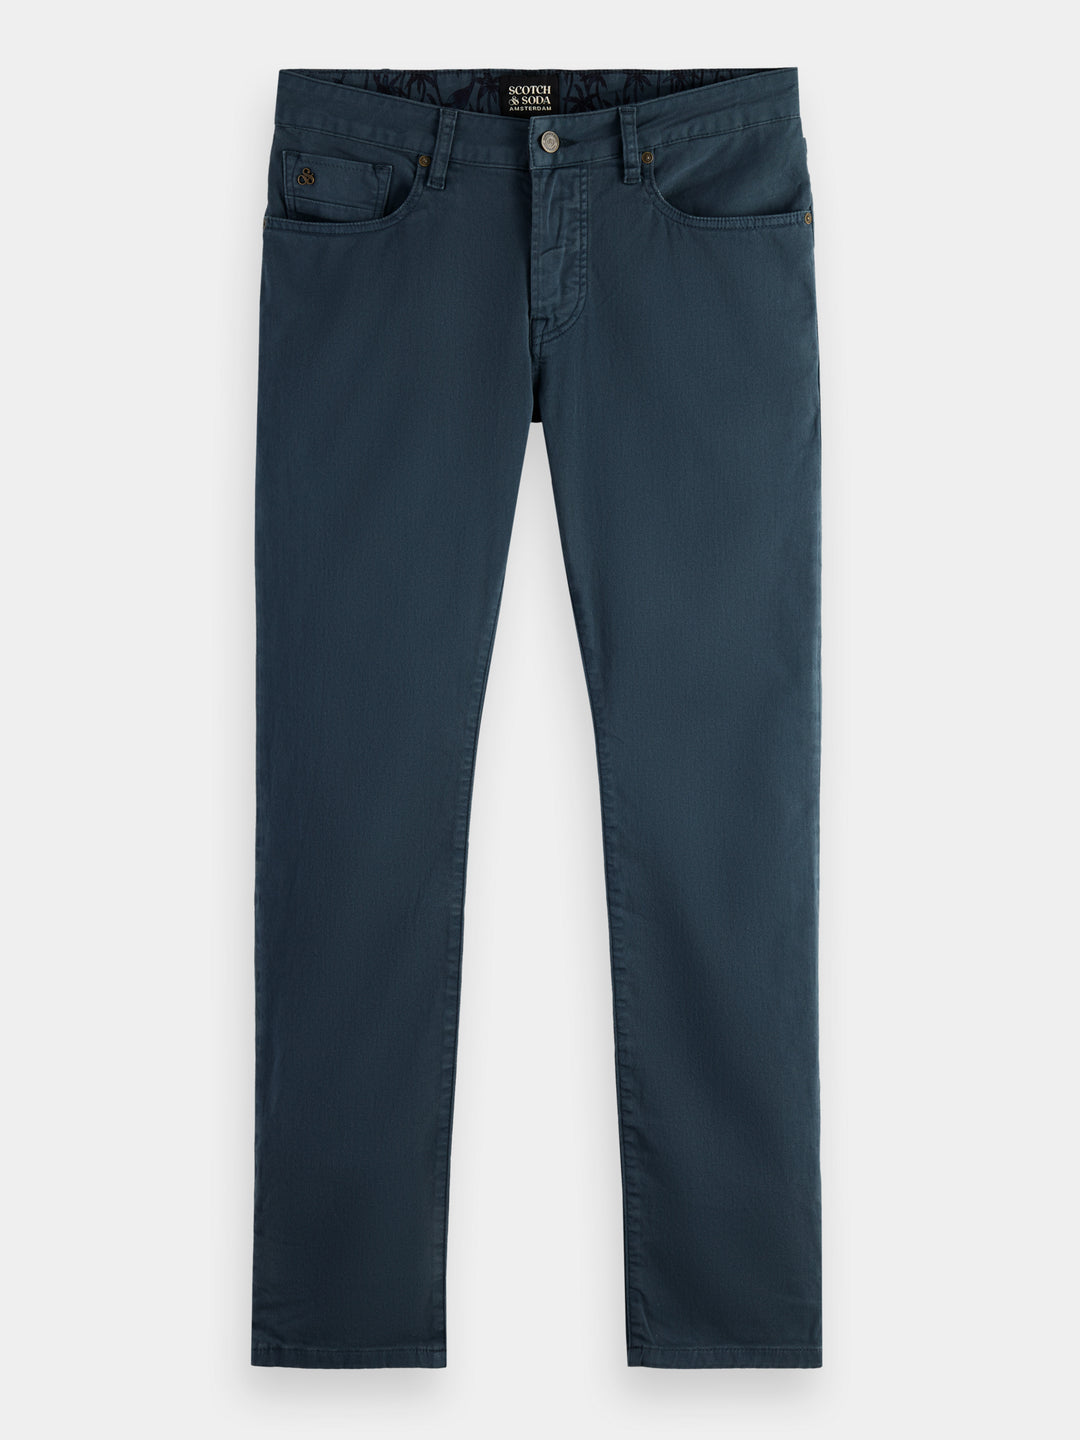 Ralston Garment Dyed Jeans in Steel | Buster McGee